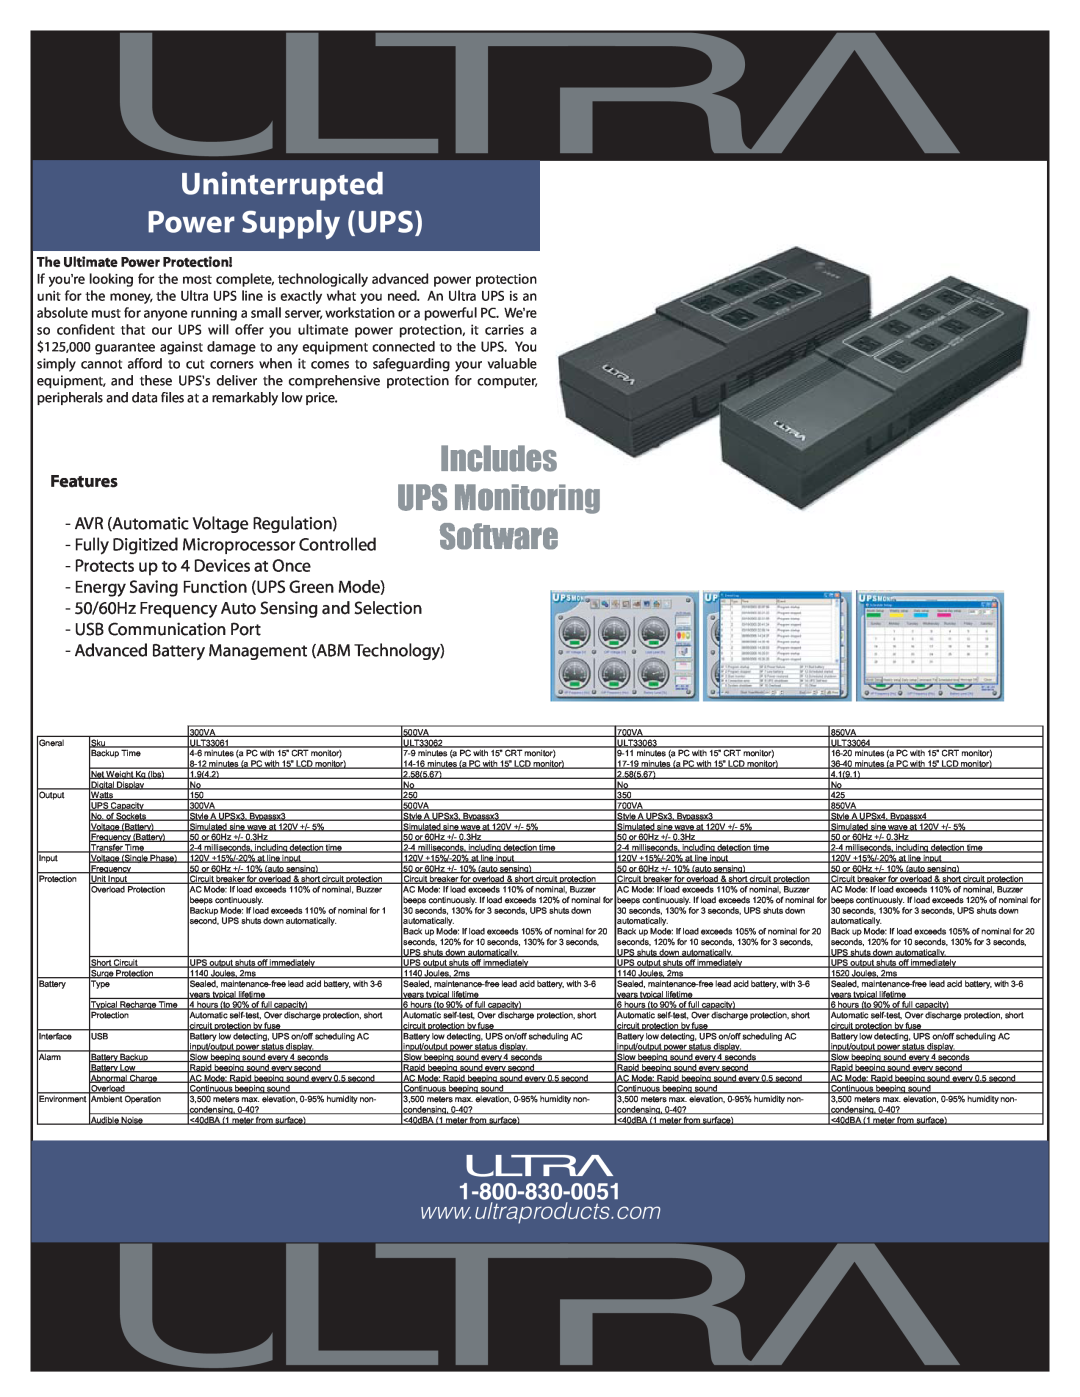 Ultra Products ULT33063, ULT33064 manual Uninterrupted Power Supply UPS, Includes, UPS Monitoring, Software, Features 